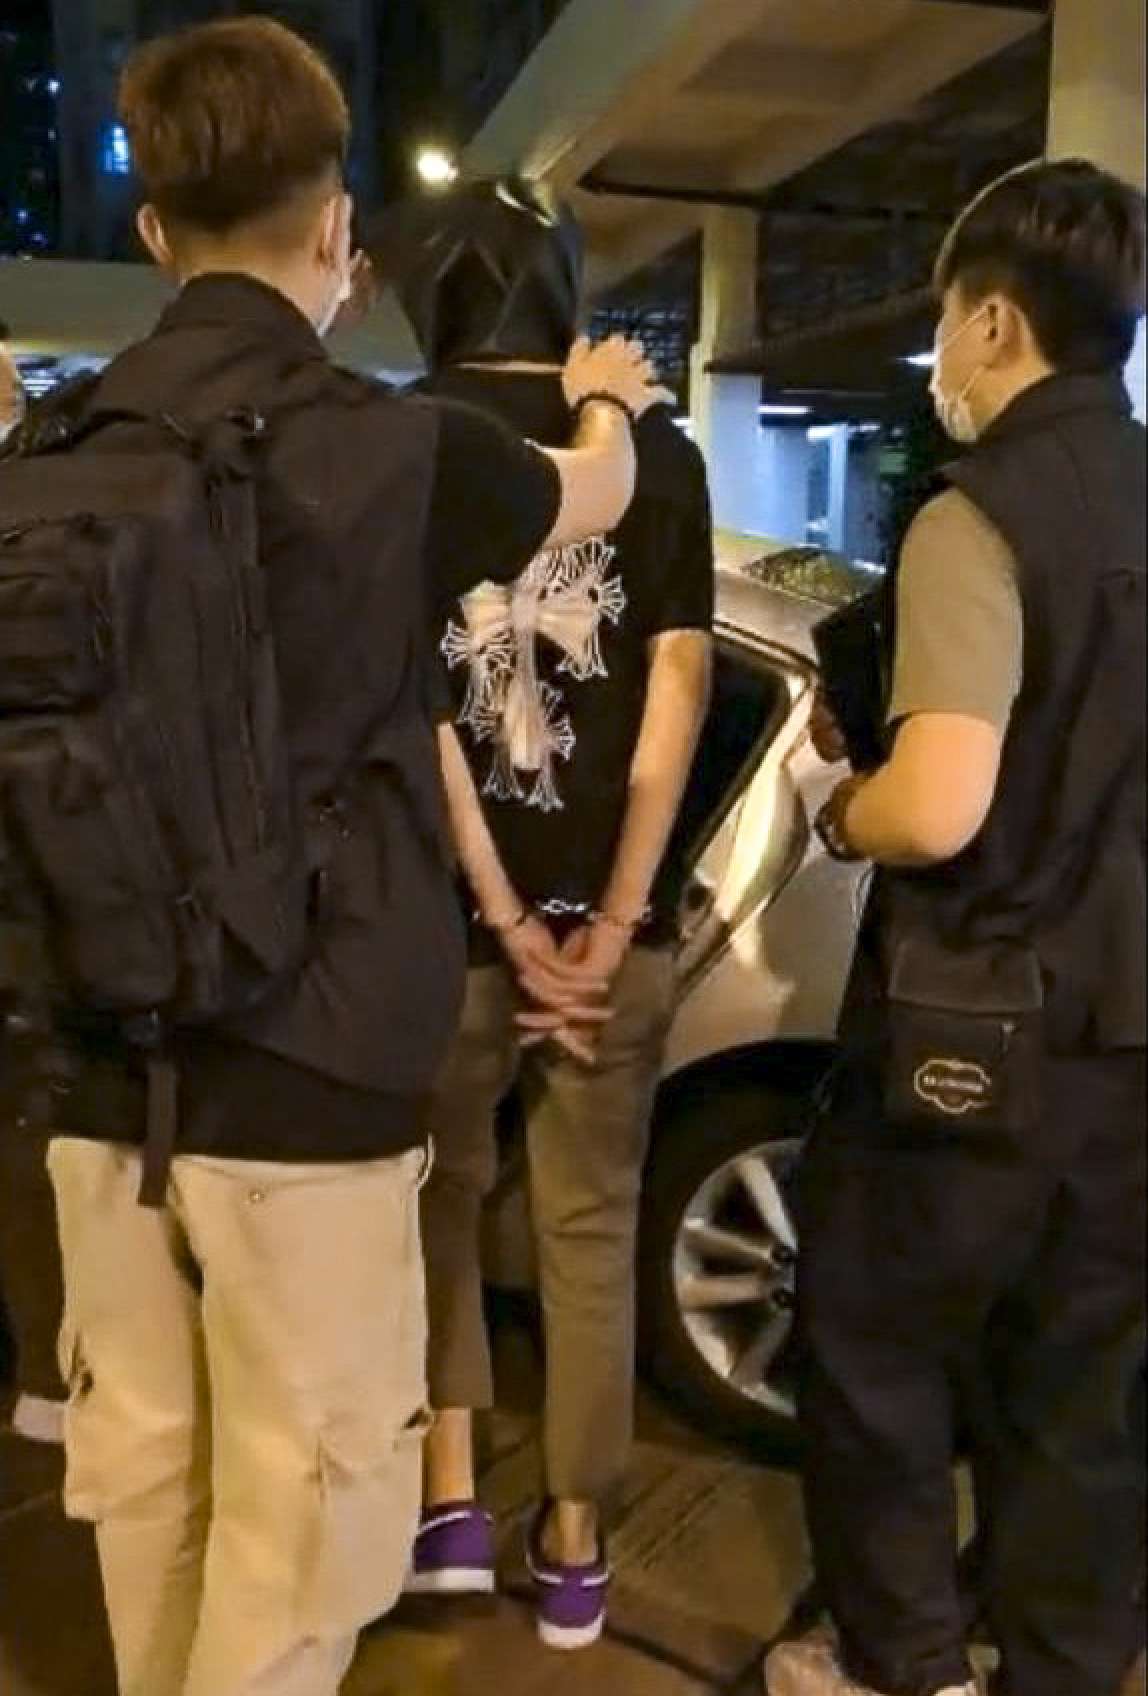 Police arrested three people, including 2 teenage boys. Photo: Handout